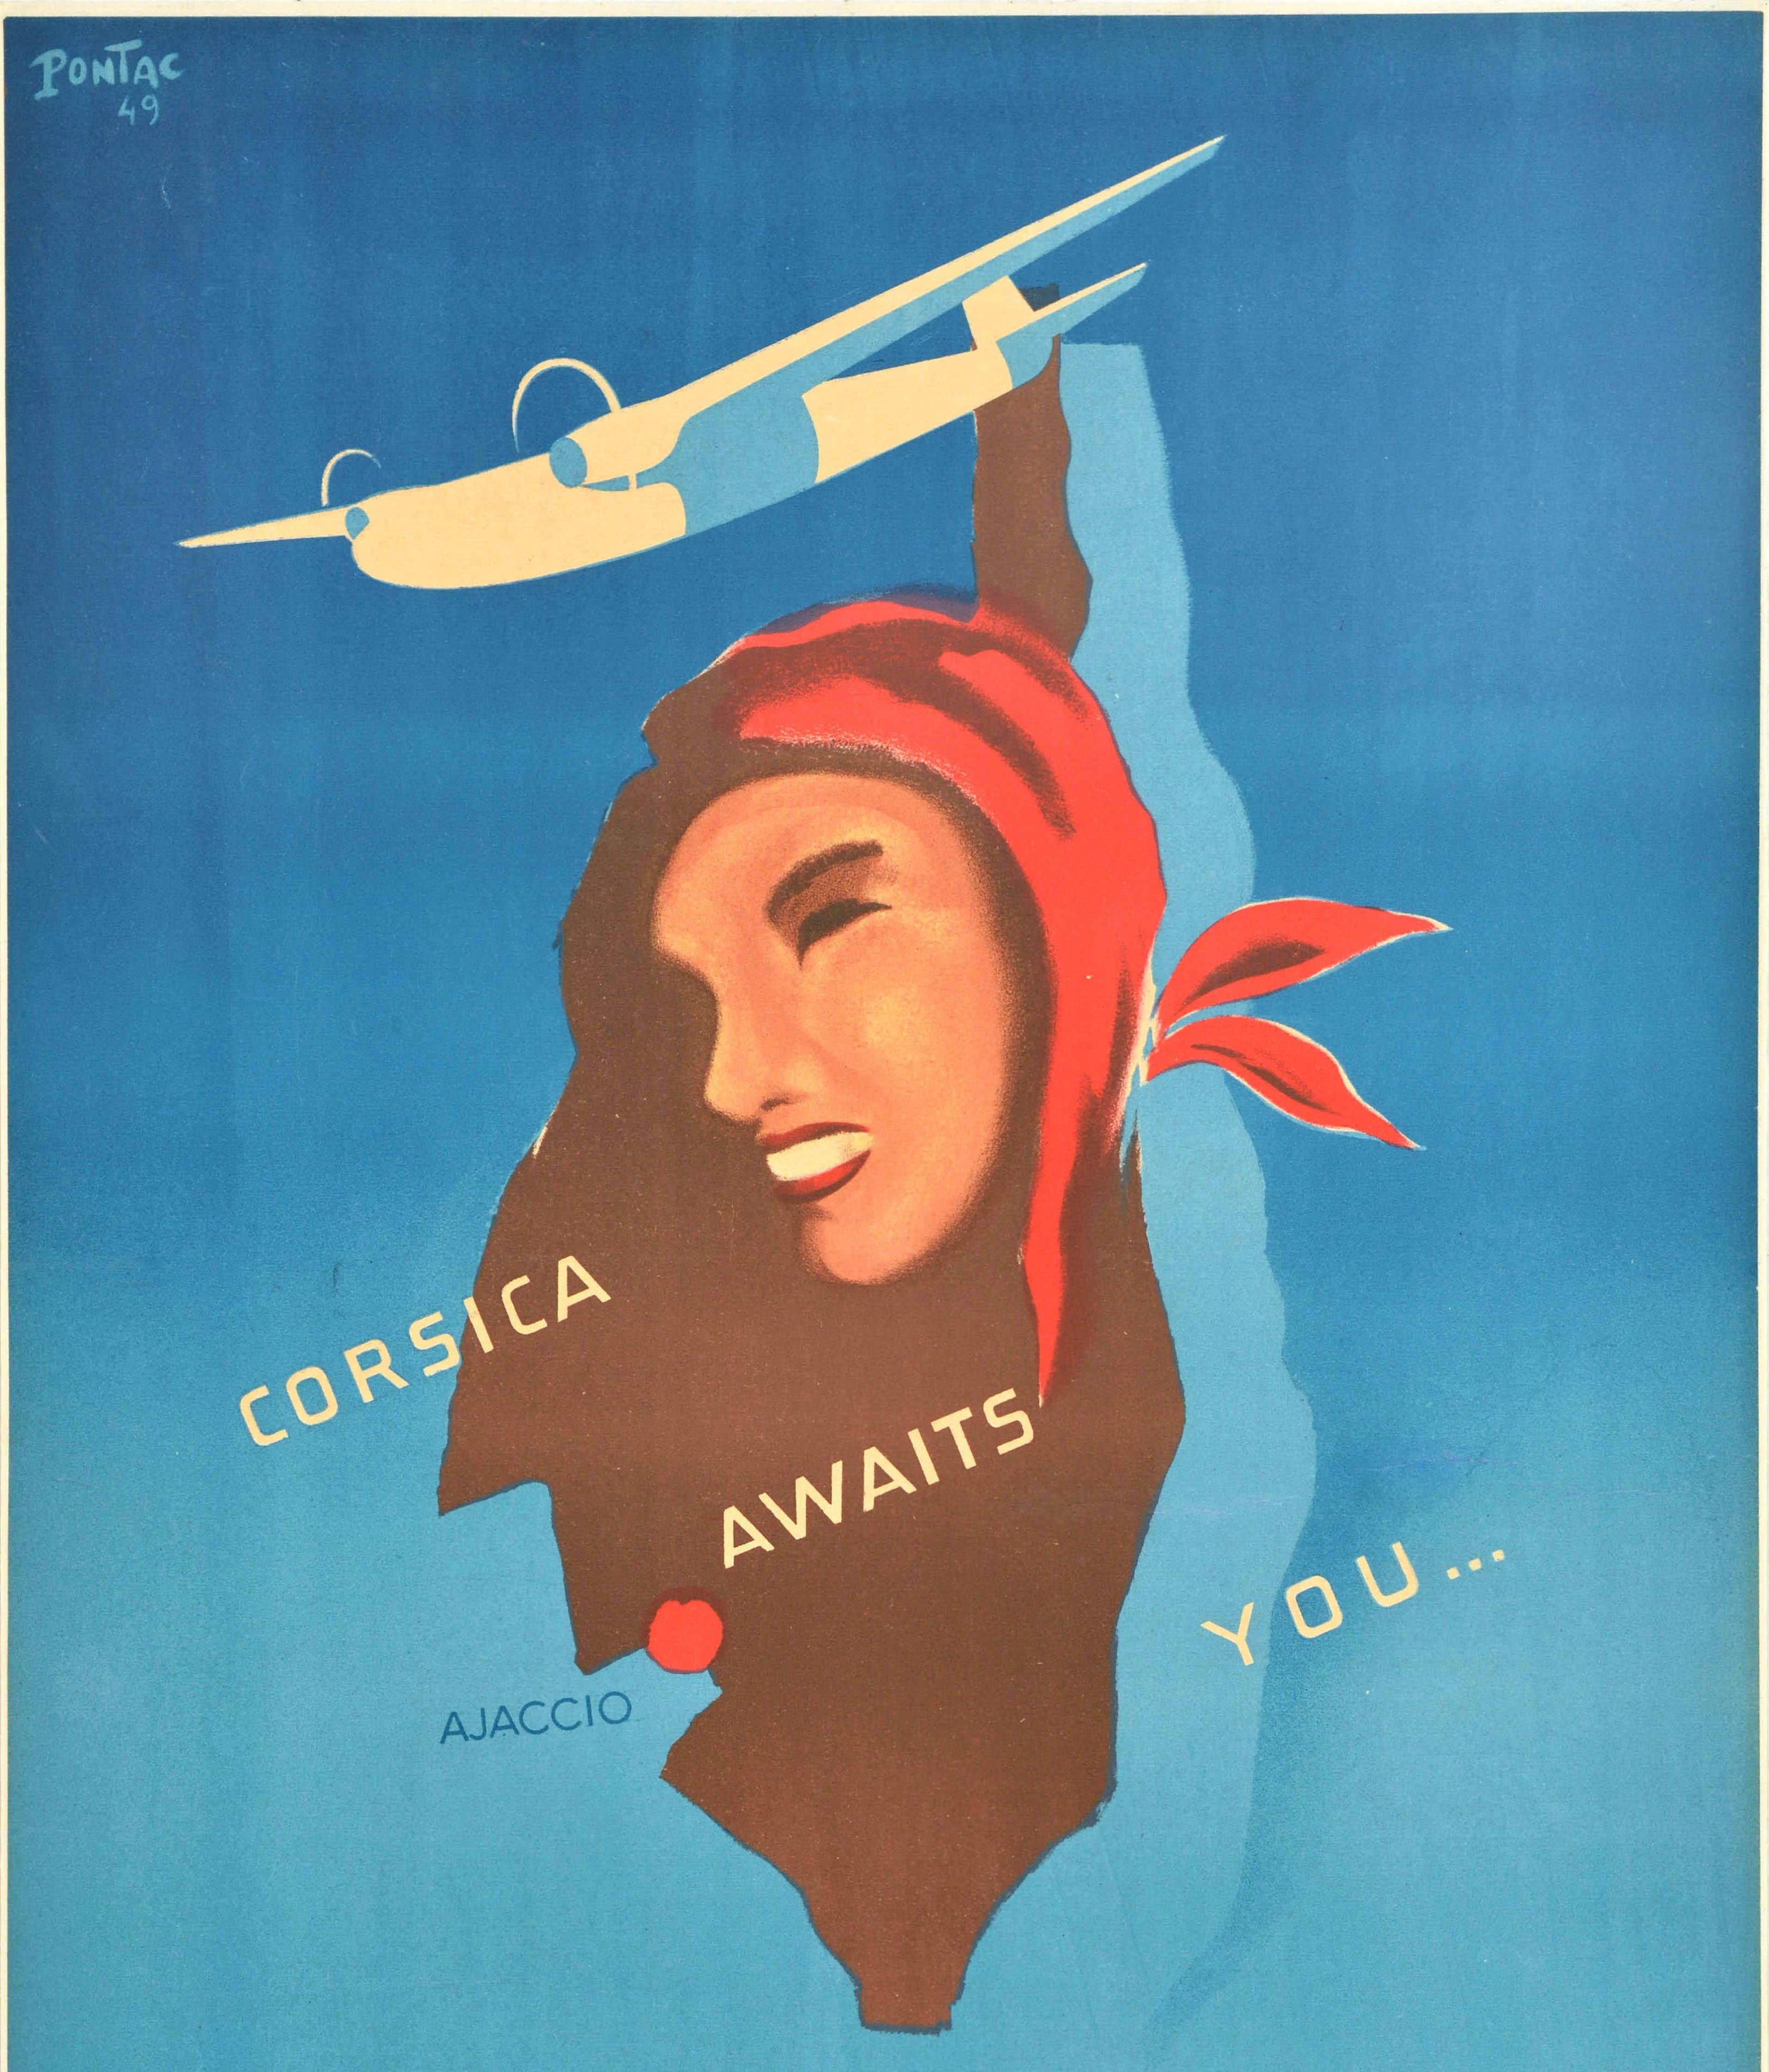 Original Vintage Travel Advertising Poster Airspan Travel Corsica Awaits You - Blue Print by Unknown